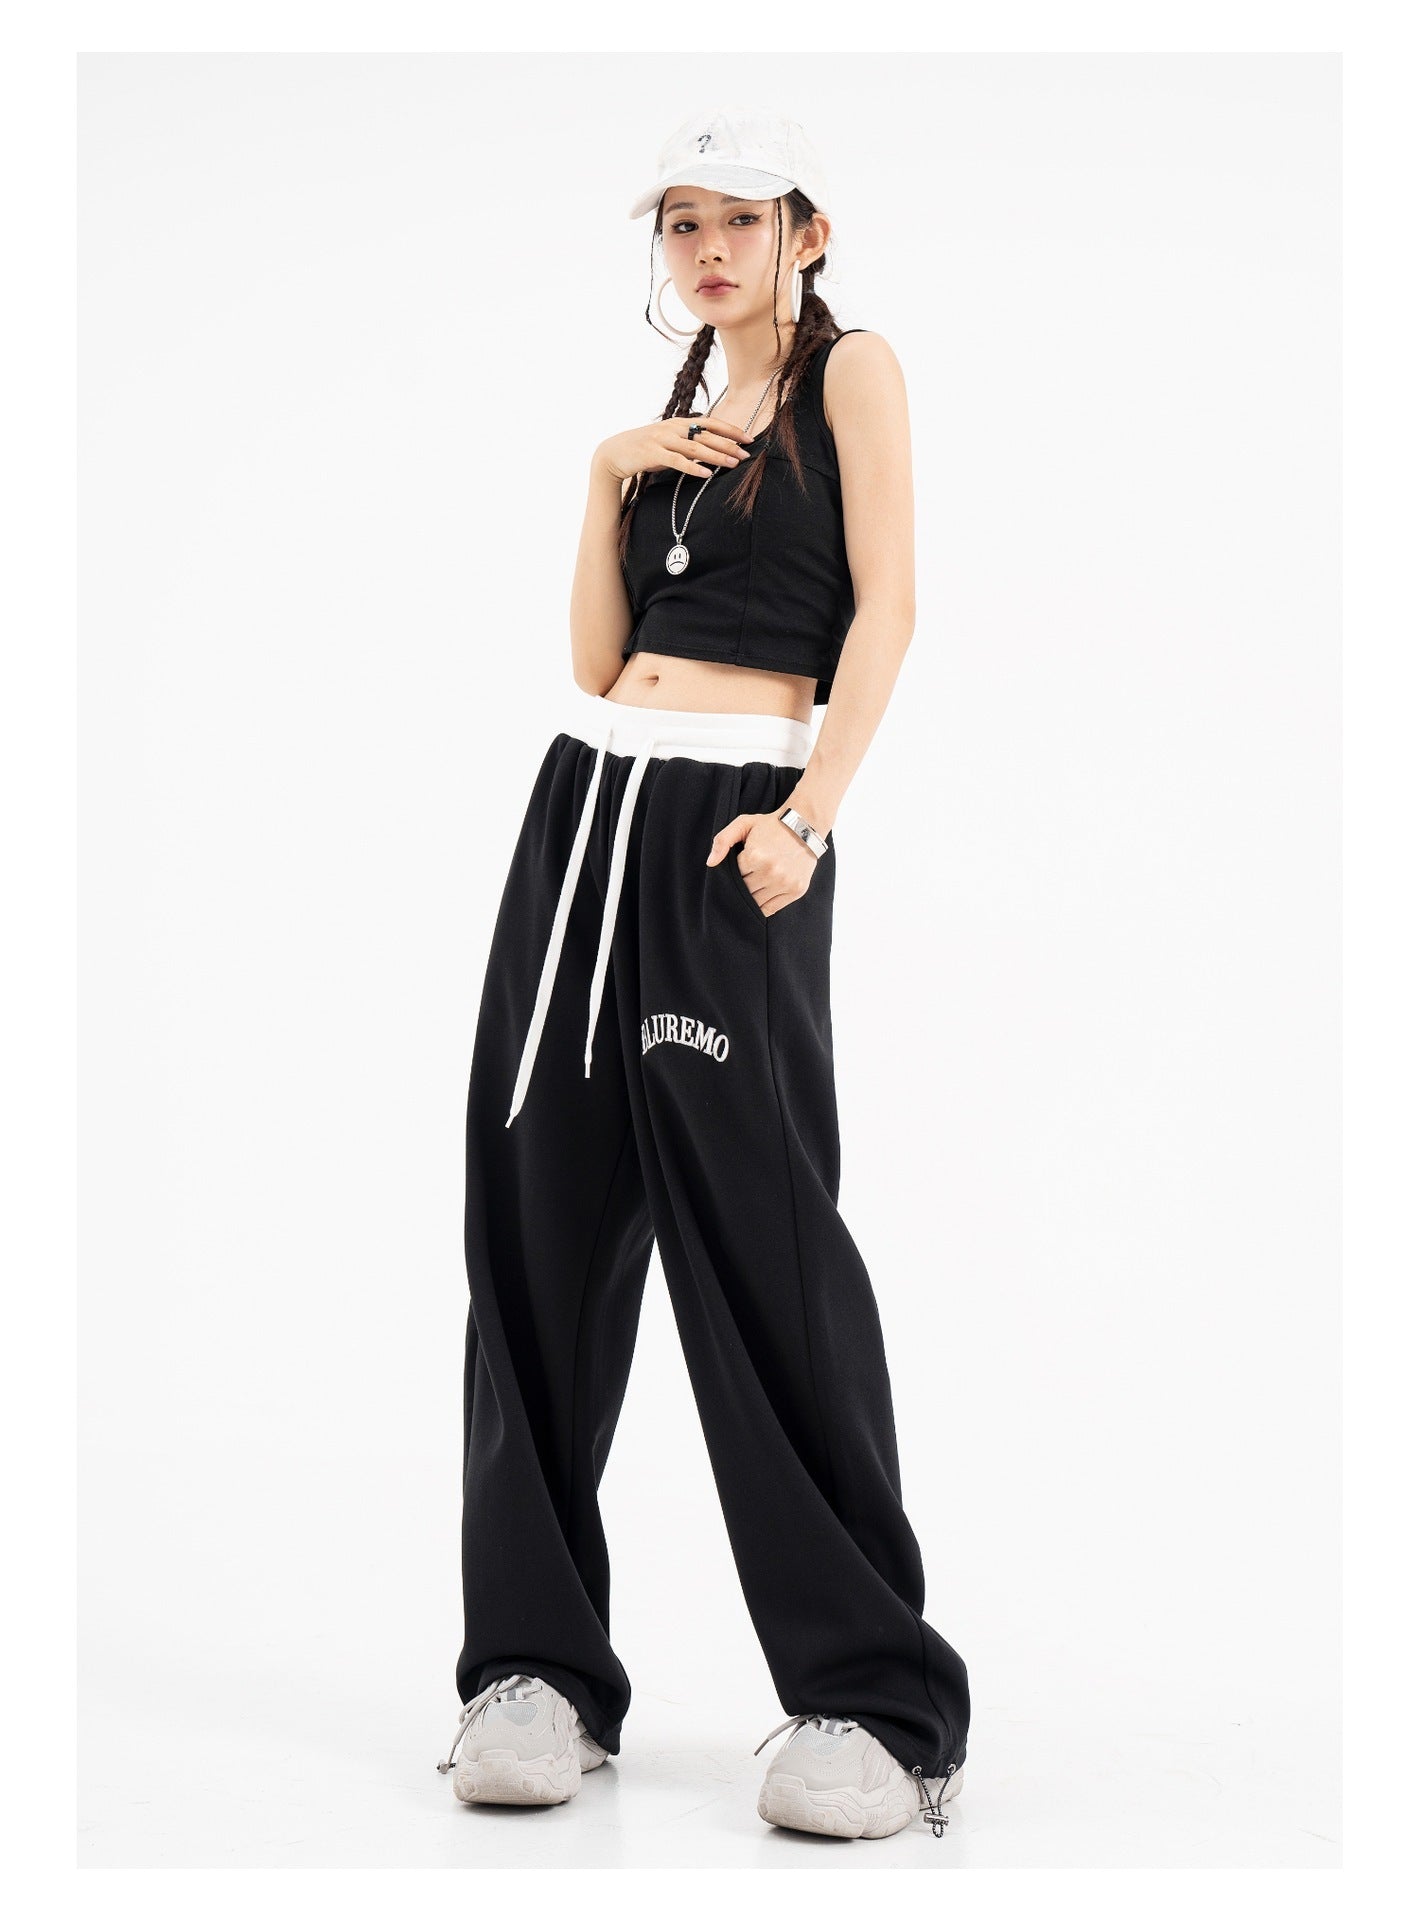 High Street Letter Embroidered Leisure Tappered Drawstring Sweatpants